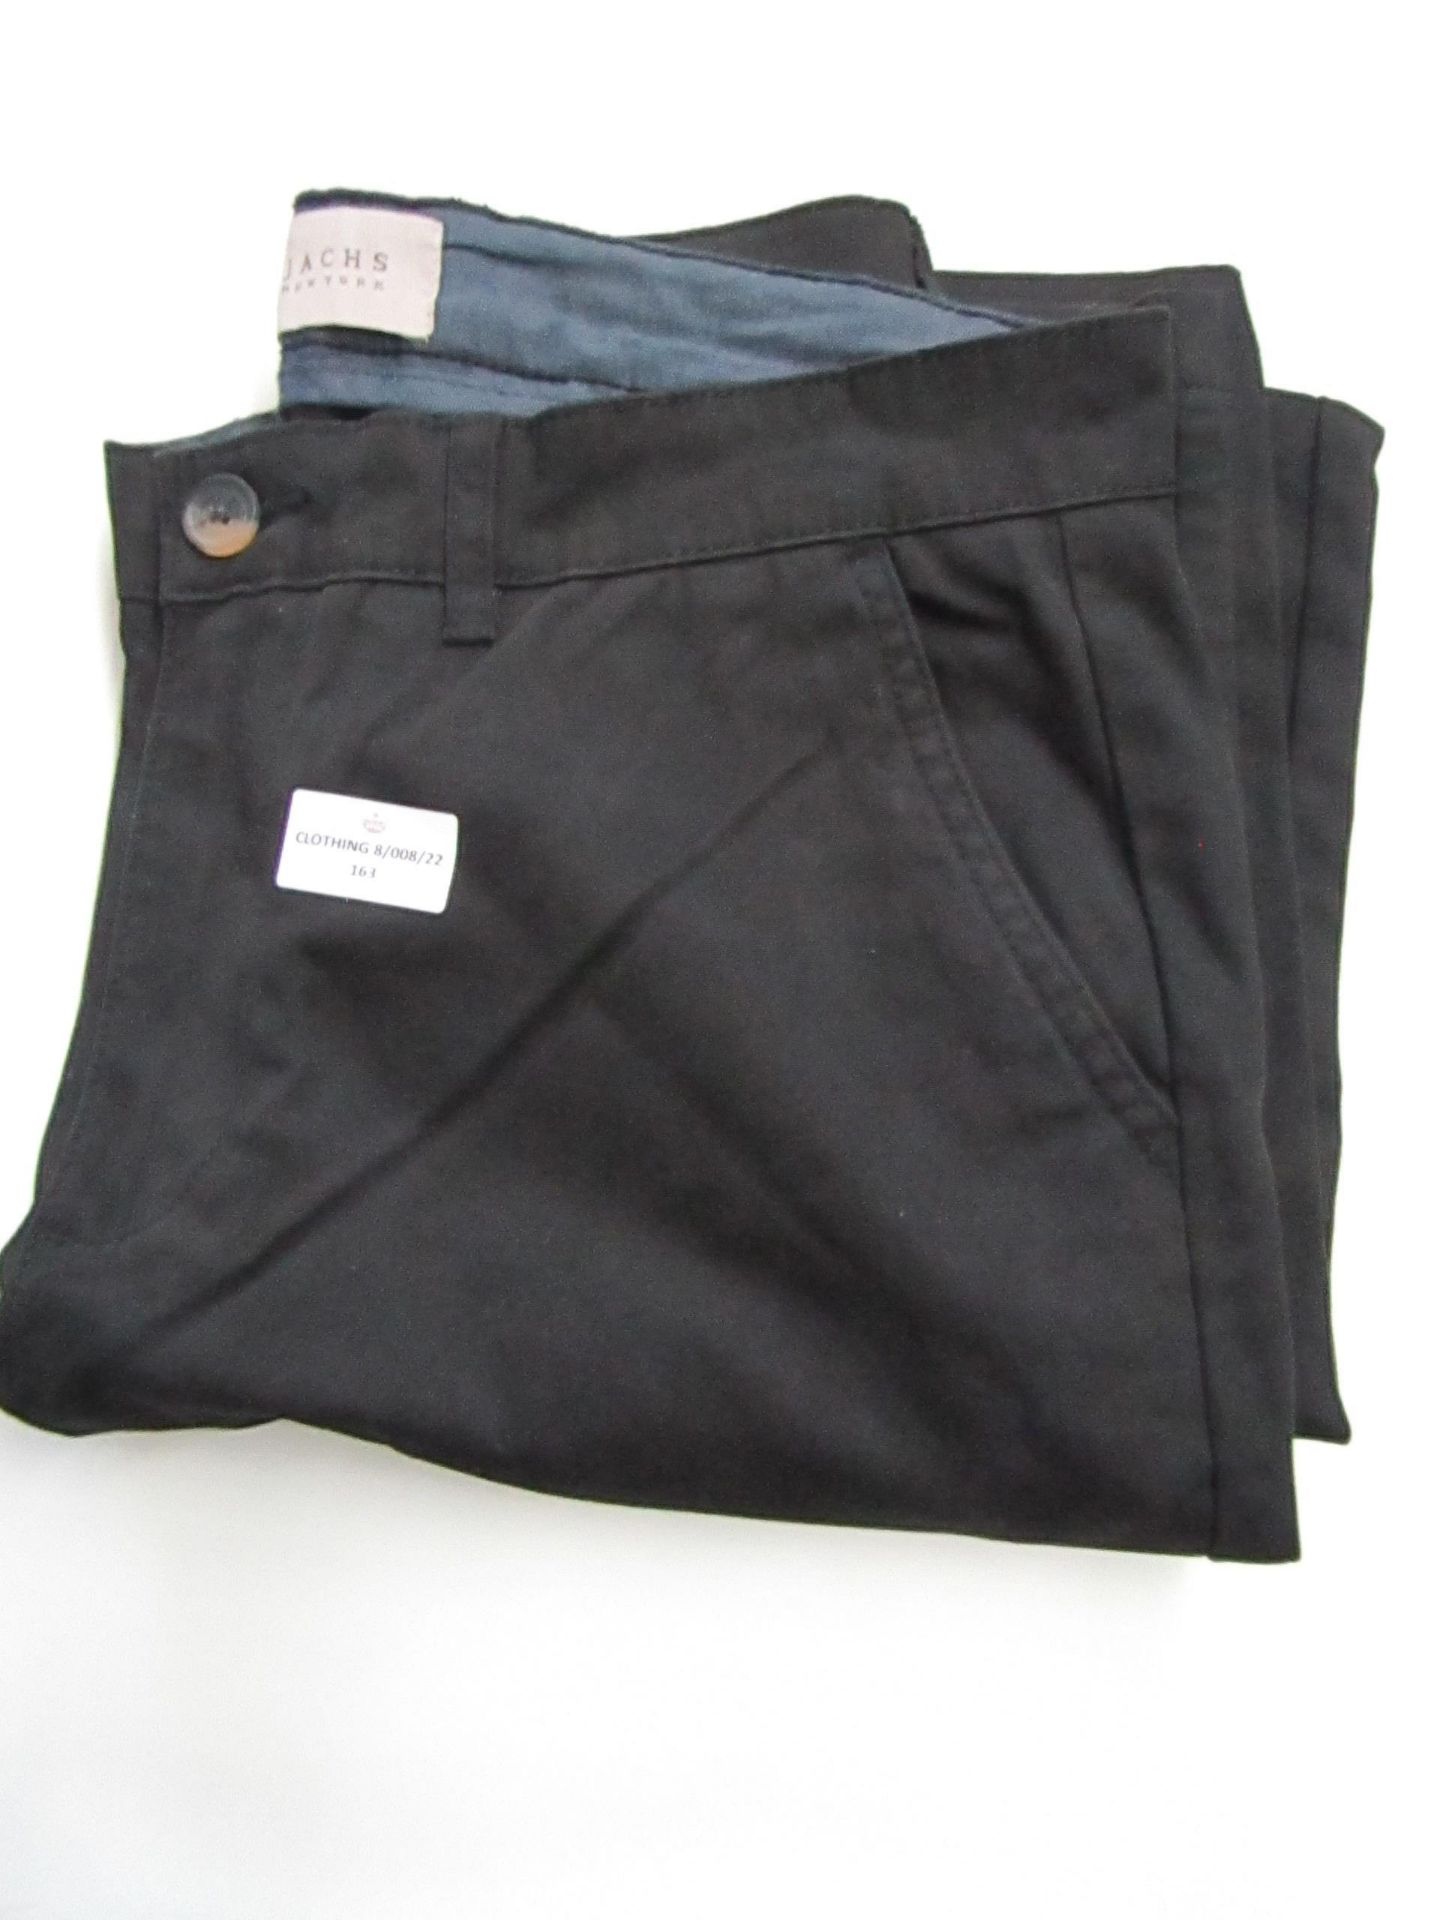 Jachs Bowie Fit Mid Rise Slim Straight Leg Chinos Black Size W32 L34 May Have Been Worn Look in Fair